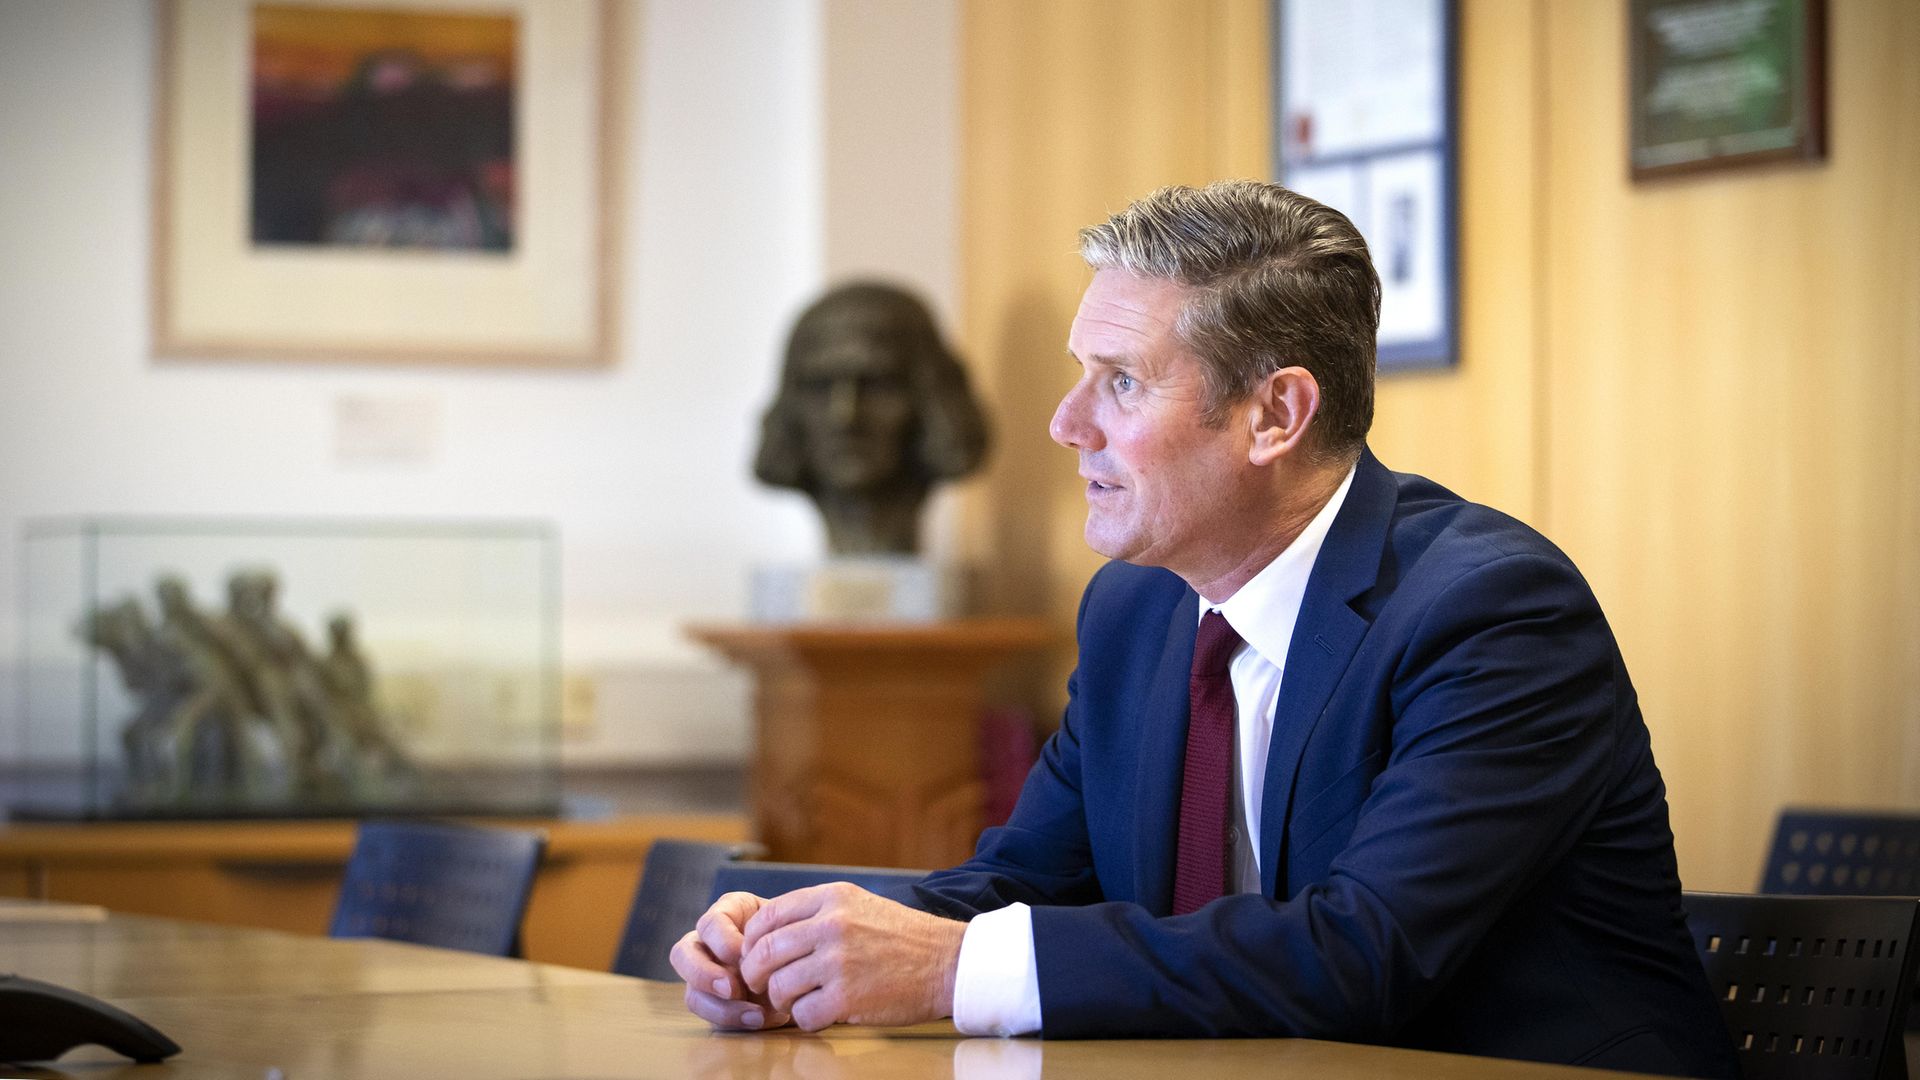 Labour leader Sir Keir Starmer during a visit to the University of Edinburgh School of Medicine. - Credit: PA